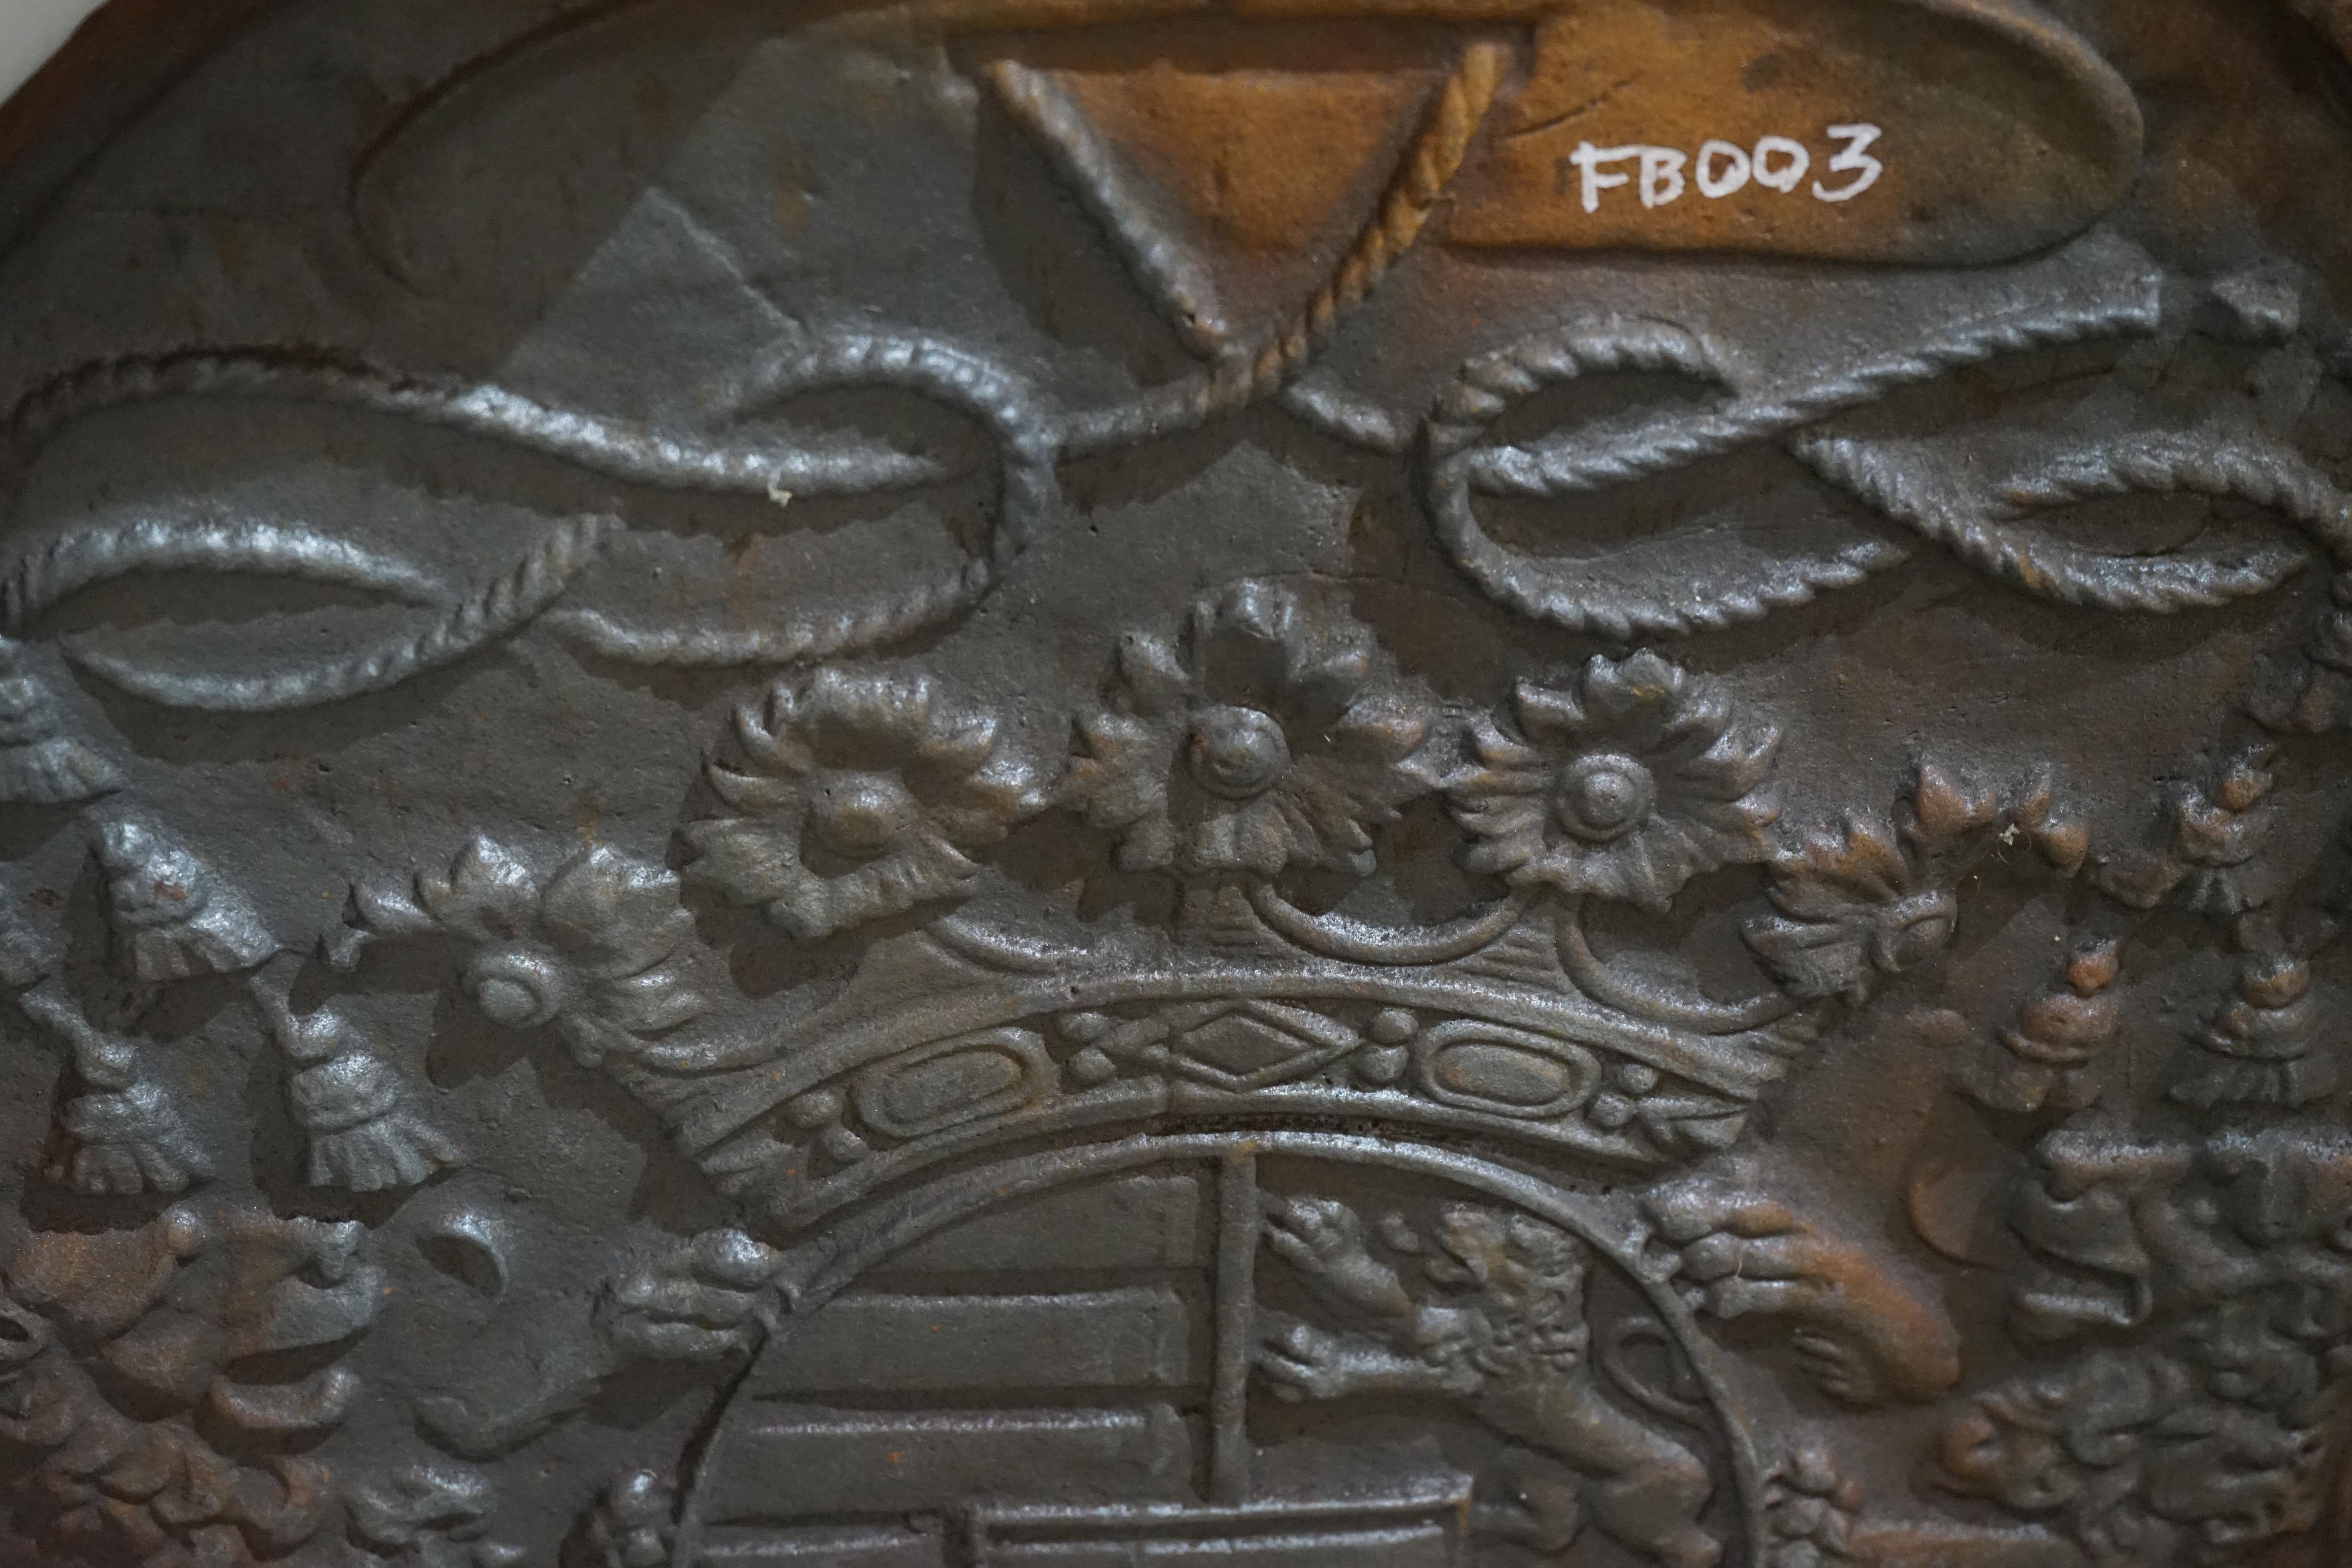 This antique fireback features a royal coat of arms with text 